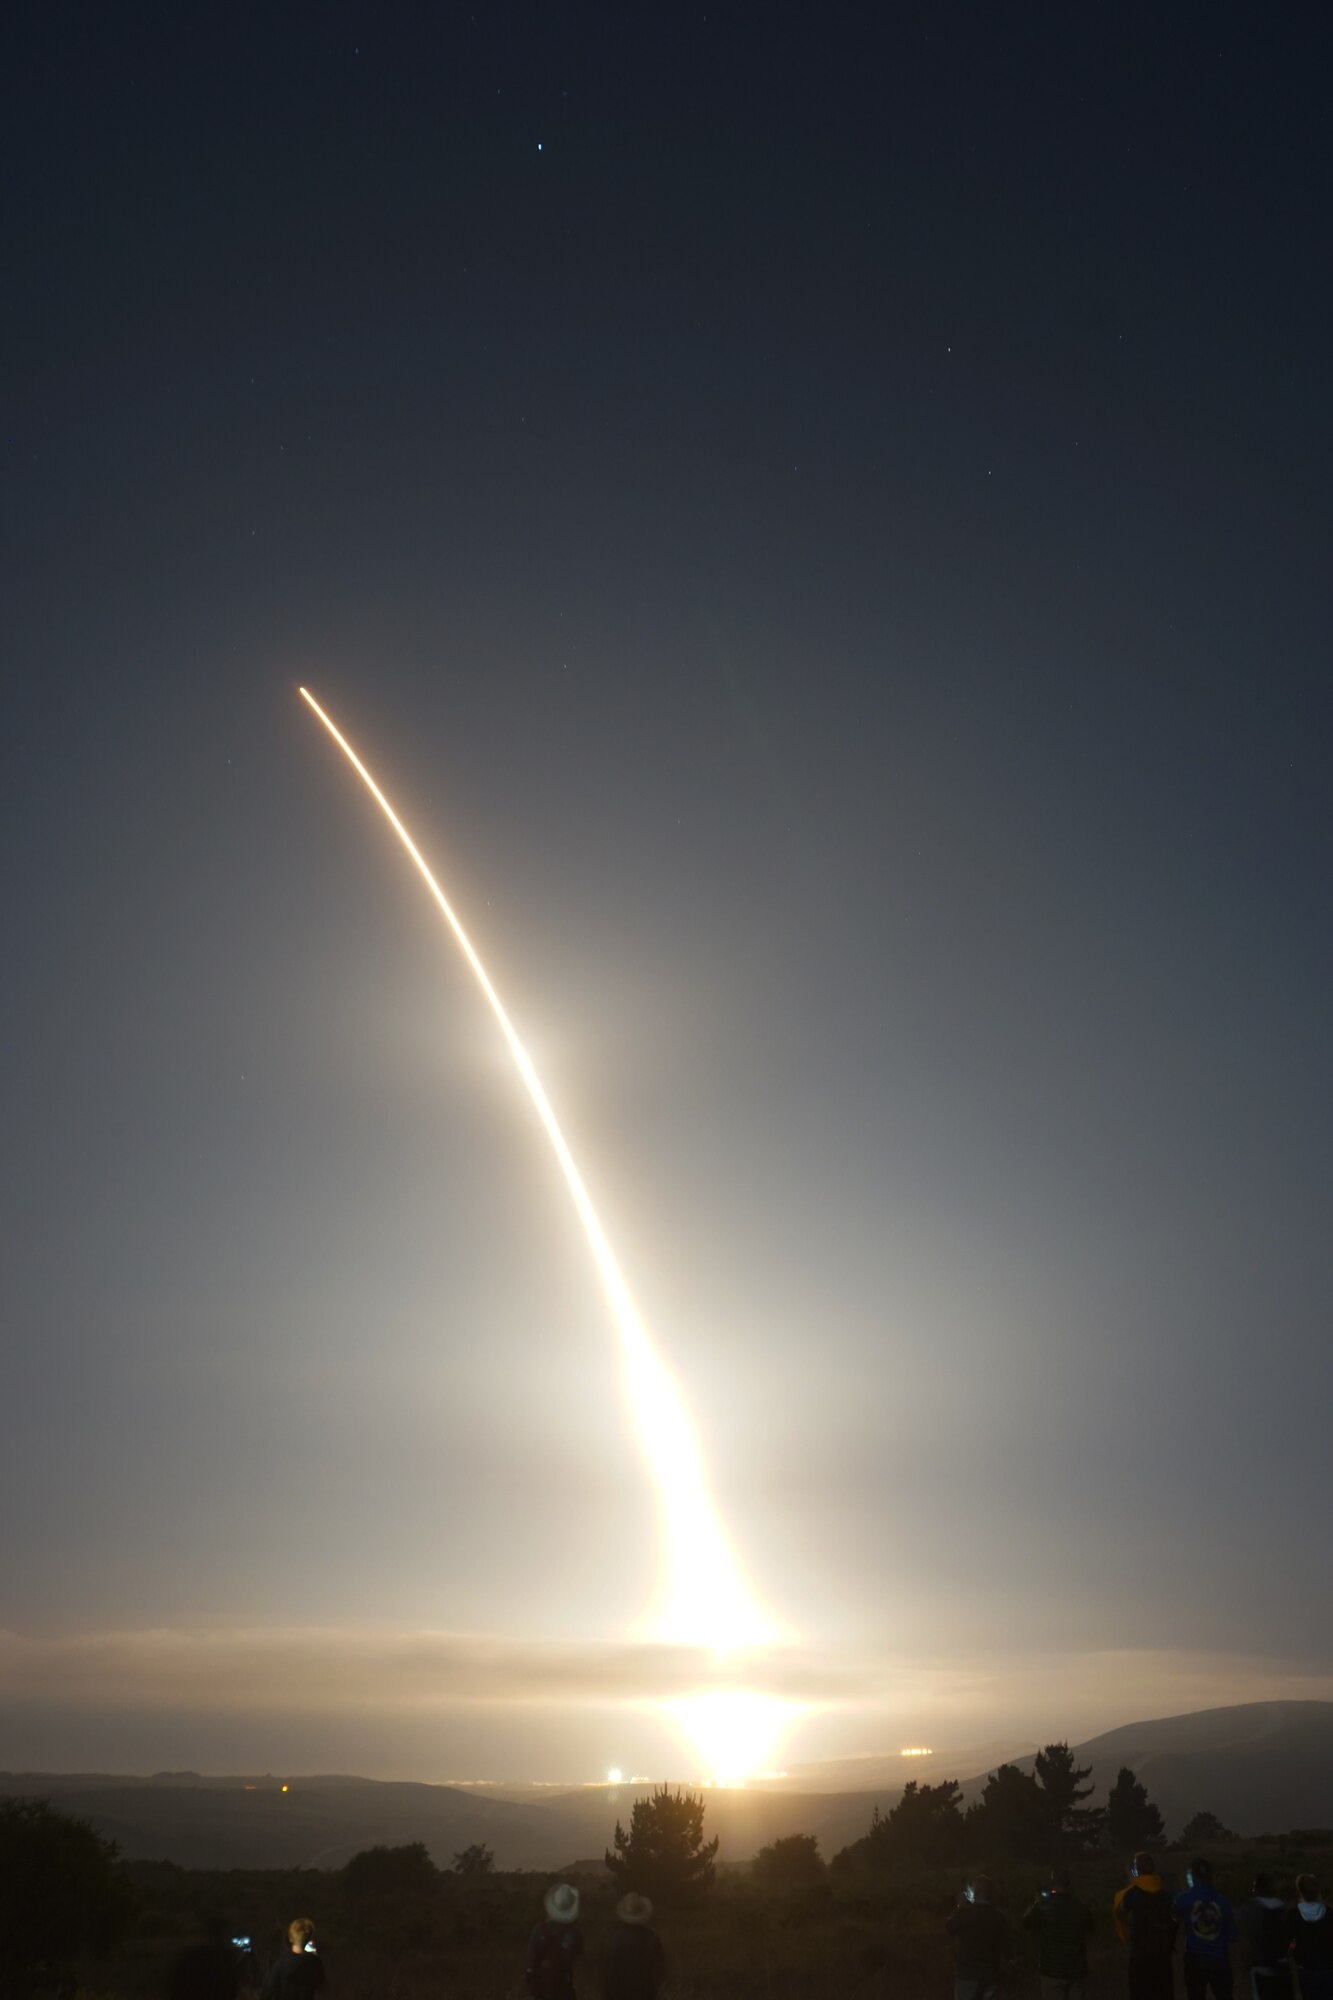 An Air Force Global Strike Command unarmed Minuteman III intercontinental ballistic missile launches during an operational test at 12:03 Pacific Daylight Time (Wednesday, September, 2020), at Vandenberg Air Force Base, California. ICBM test launches demonstrate the U.S. nuclear enterprise is safe, secure, effective and ready to defend the United States and its allies. ICBMs provide the U.S. and its allies the necessary deterrent capability to maintain freedom to operate and navigate globally in accordance with international laws and norms. (Courtesy photo by Connor Riley)